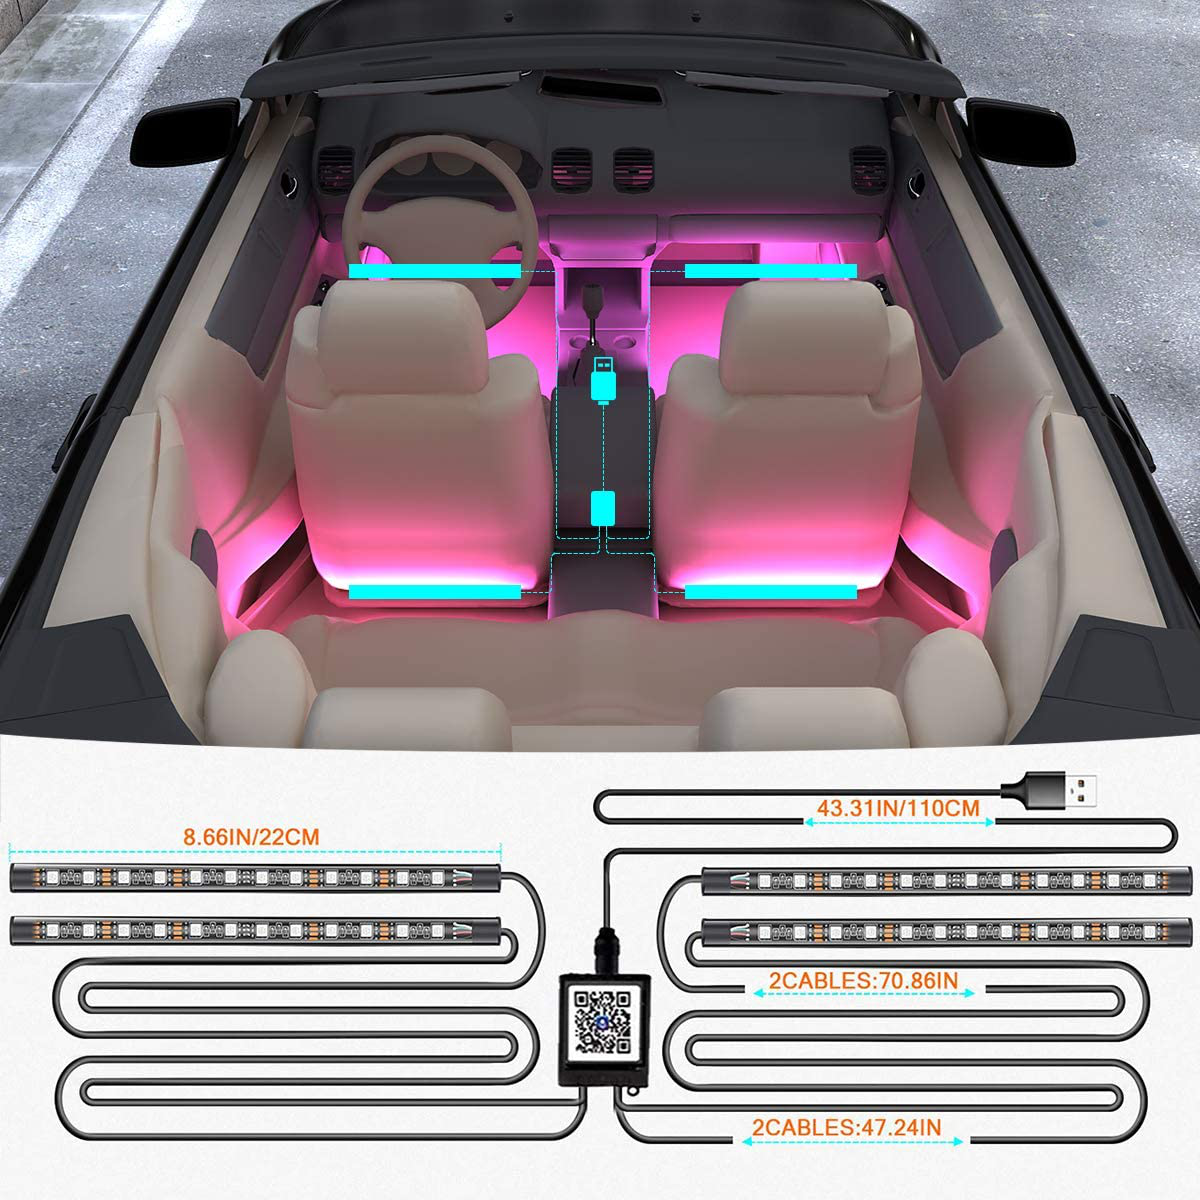 LED Interior Car Lights, App Controlled Car Interior Lights with USB Port, Multicolor Car LED Lights Interior as Ambient Lights, Music Sync Interior LED Lights for Cars with Sound Active Function